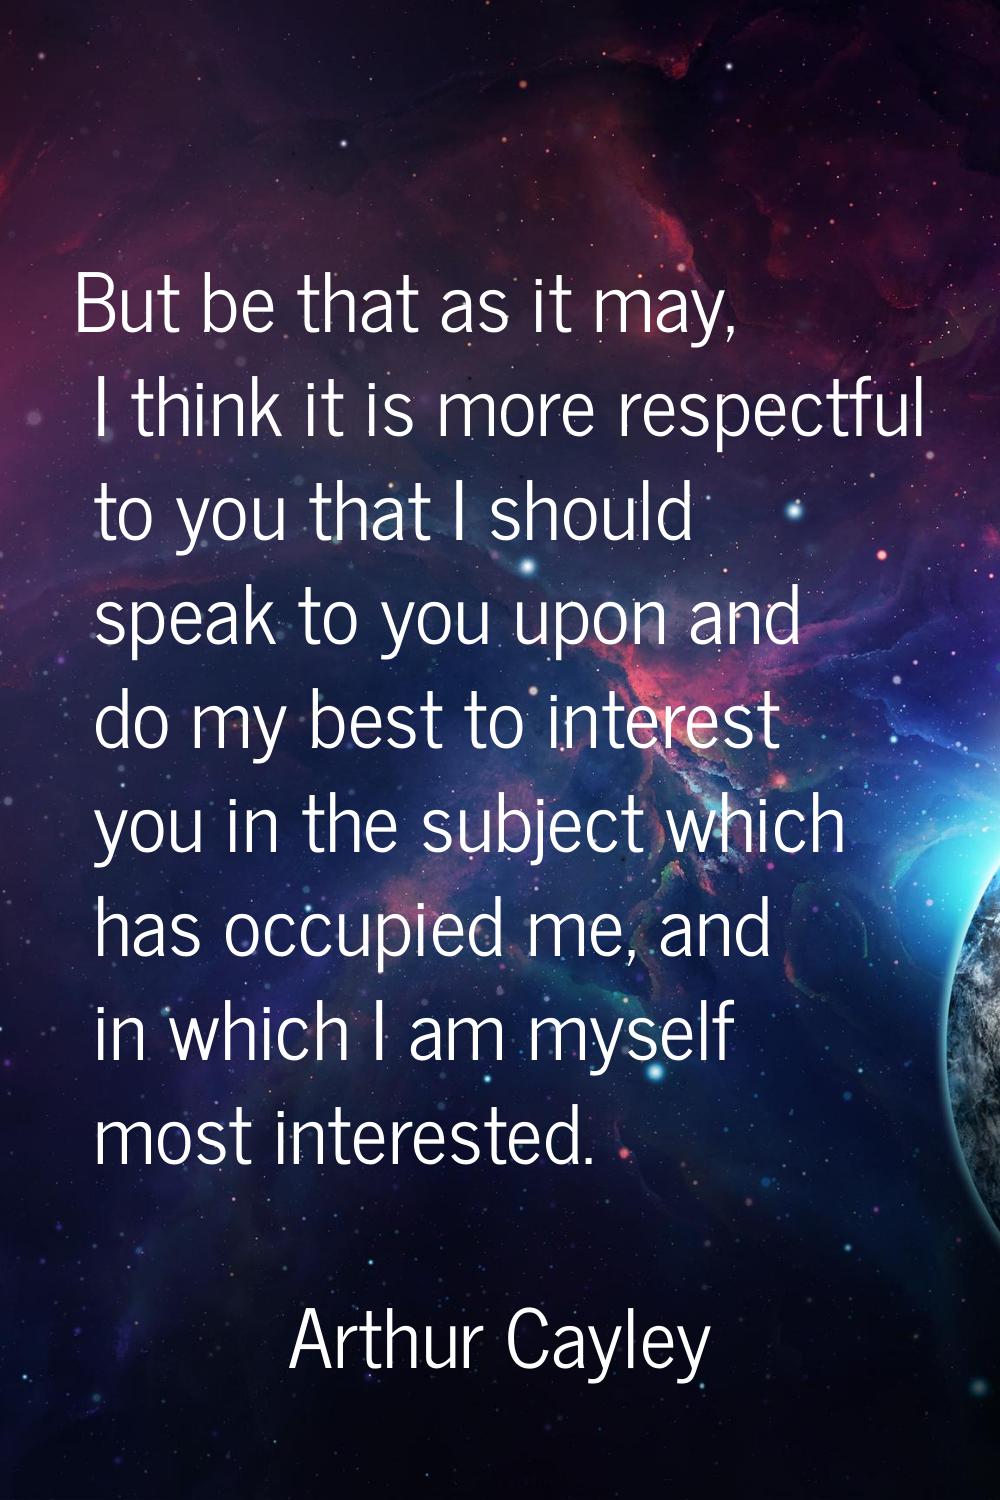 But be that as it may, I think it is more respectful to you that I should speak to you upon and do 